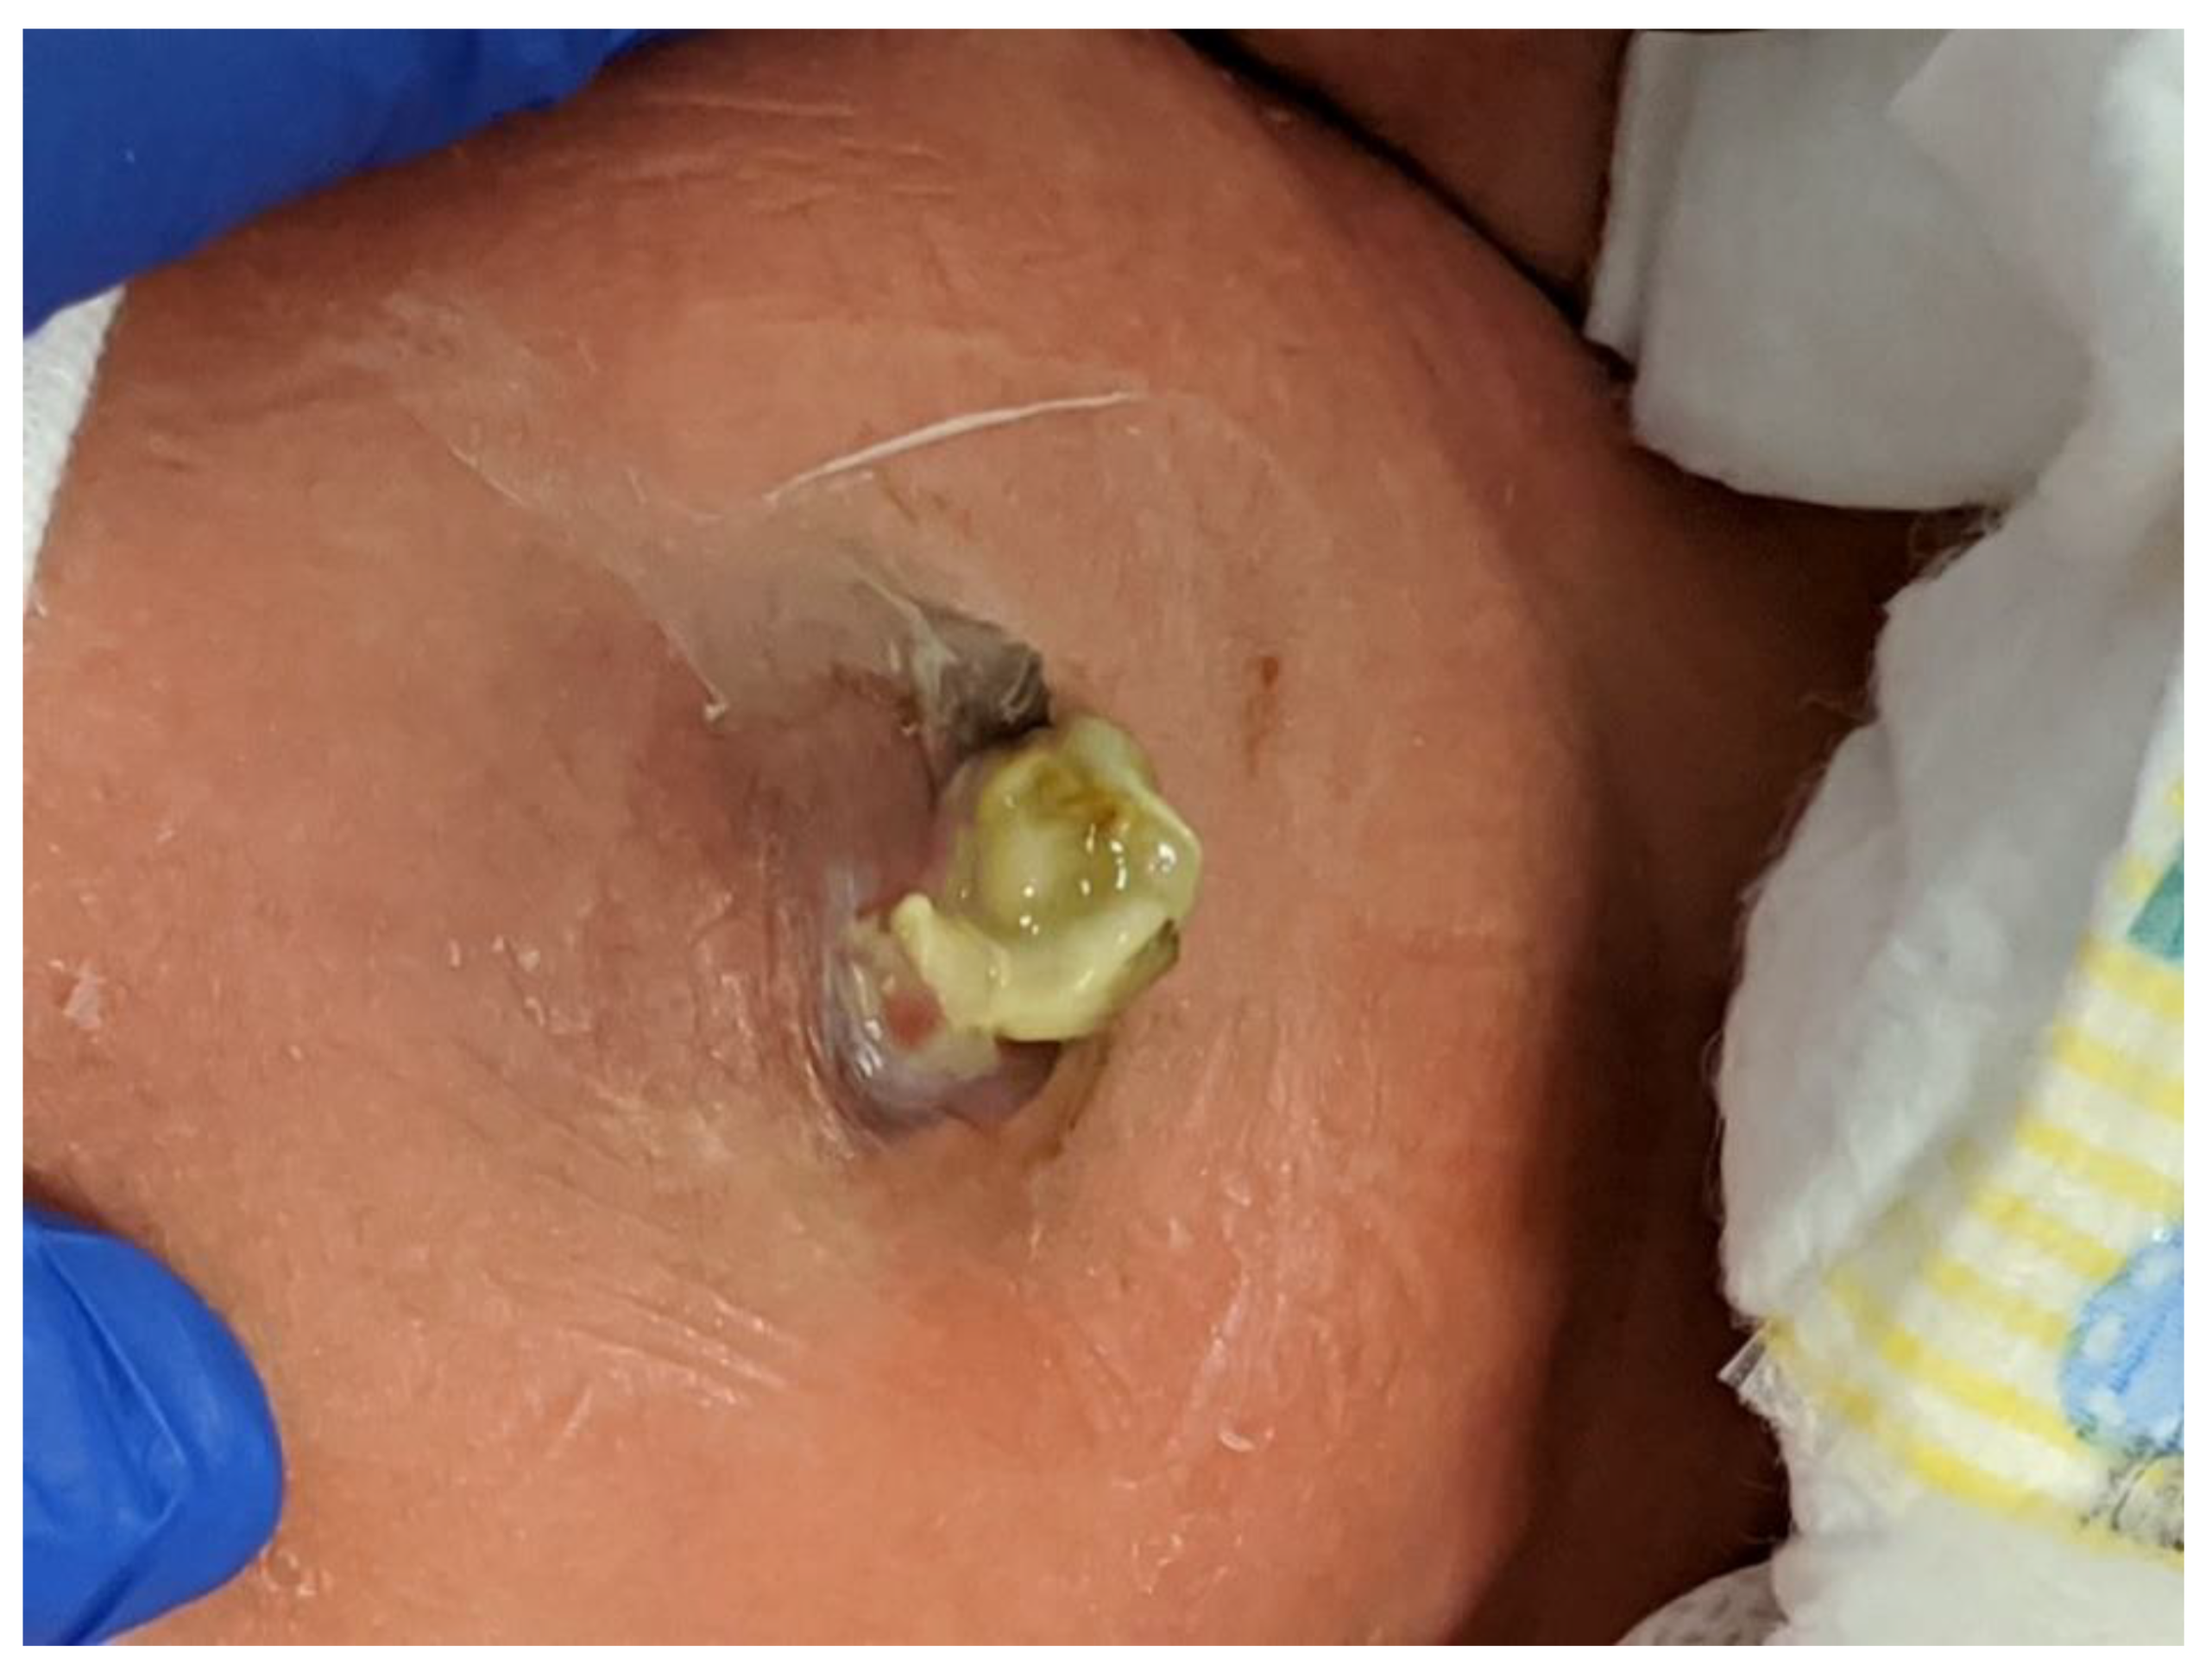 PDF] Spontaneous rupture of a congenital umbilical hernia in an infant: a  rare complication